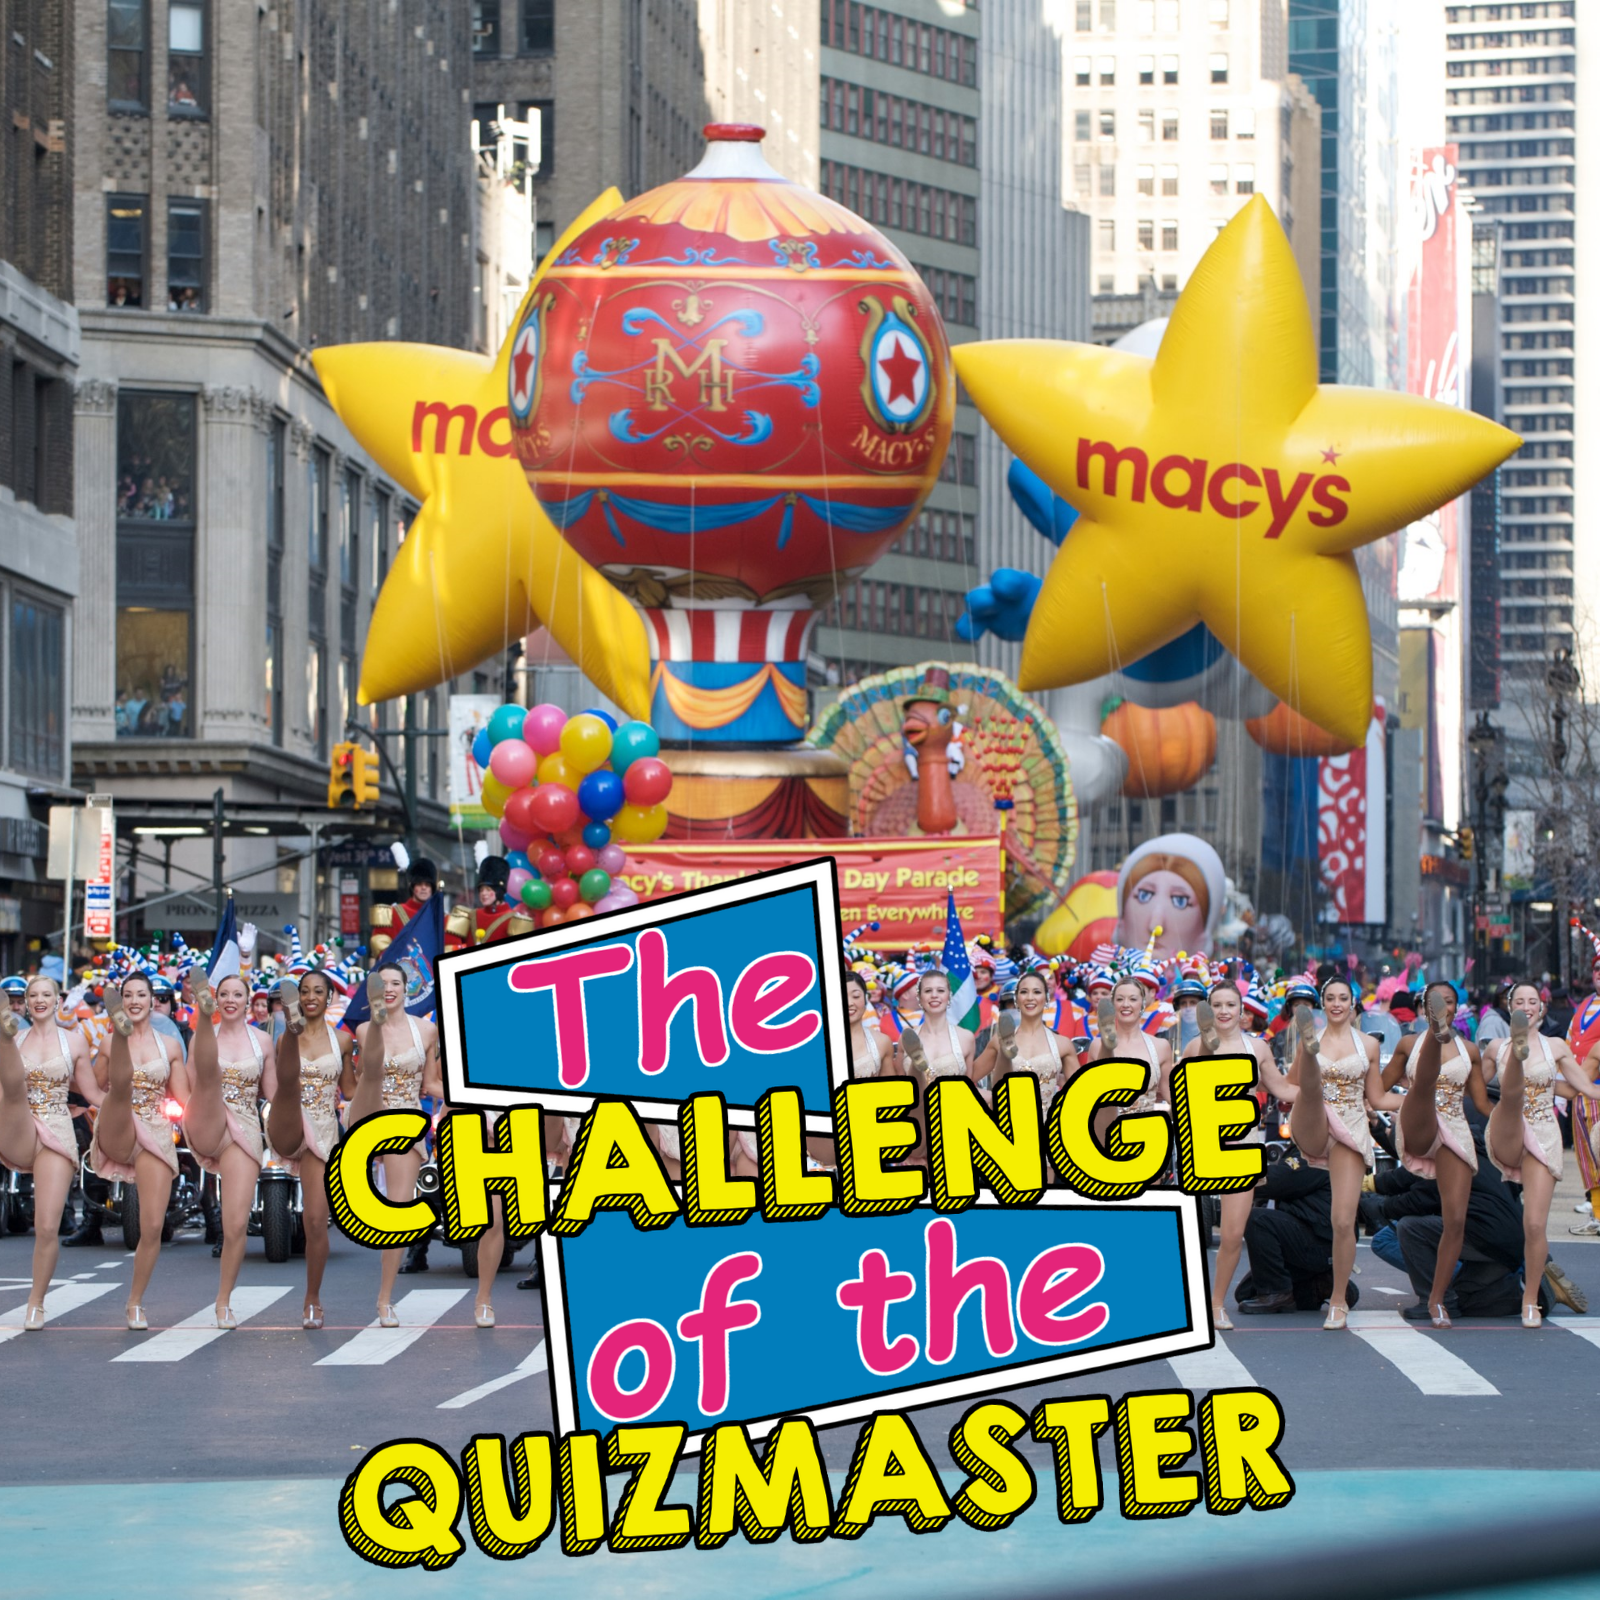 Which Parade Balloon Matches Your Personality? - The Challenge of the Quizmaster